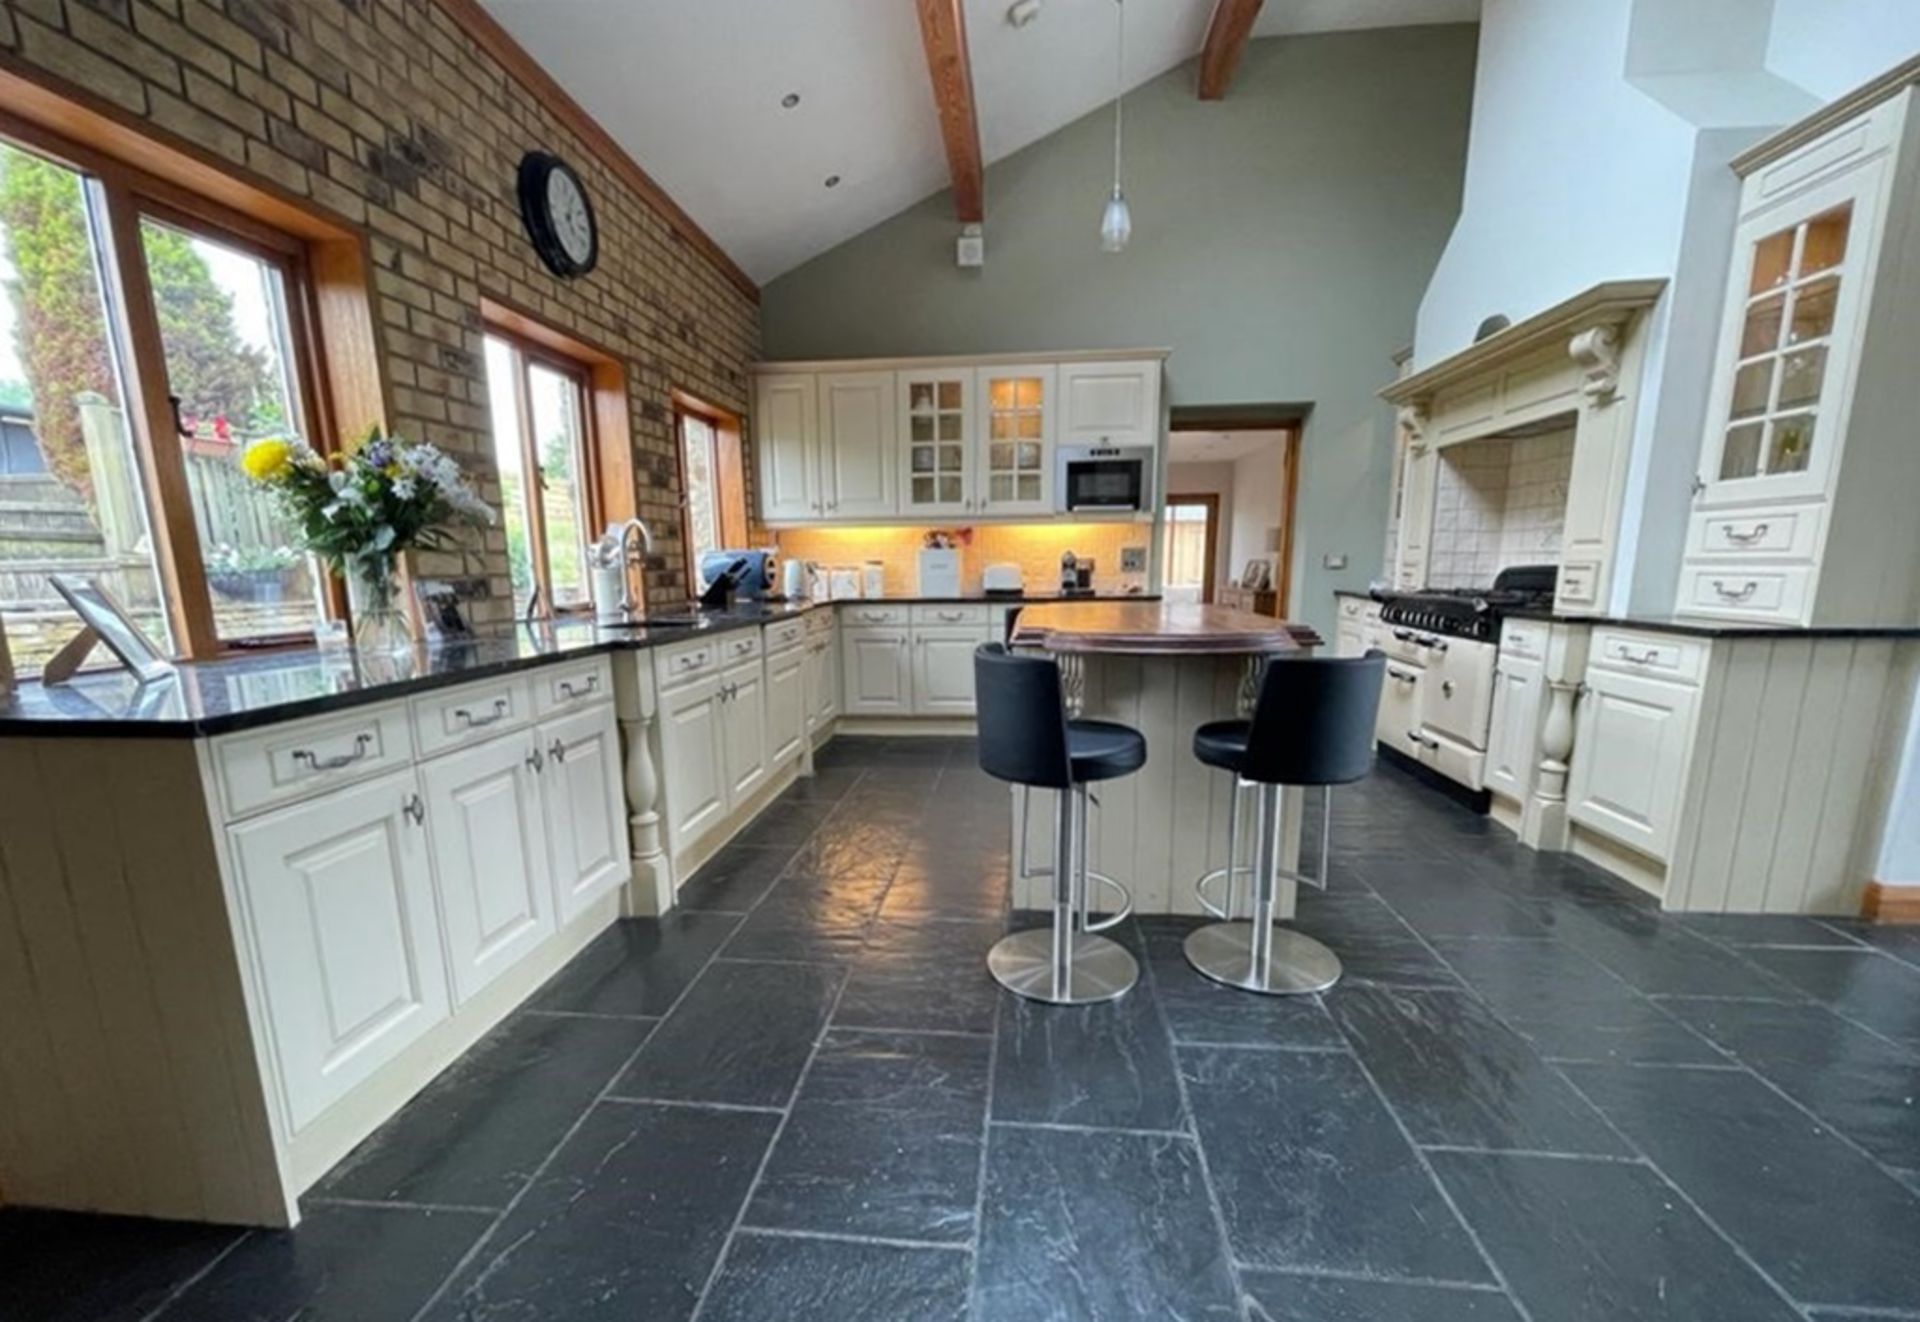 1 x Solid Wood Hand Painted Fitted Kitchen With Contemporary Island and Granite Worktops - NO VAT ON